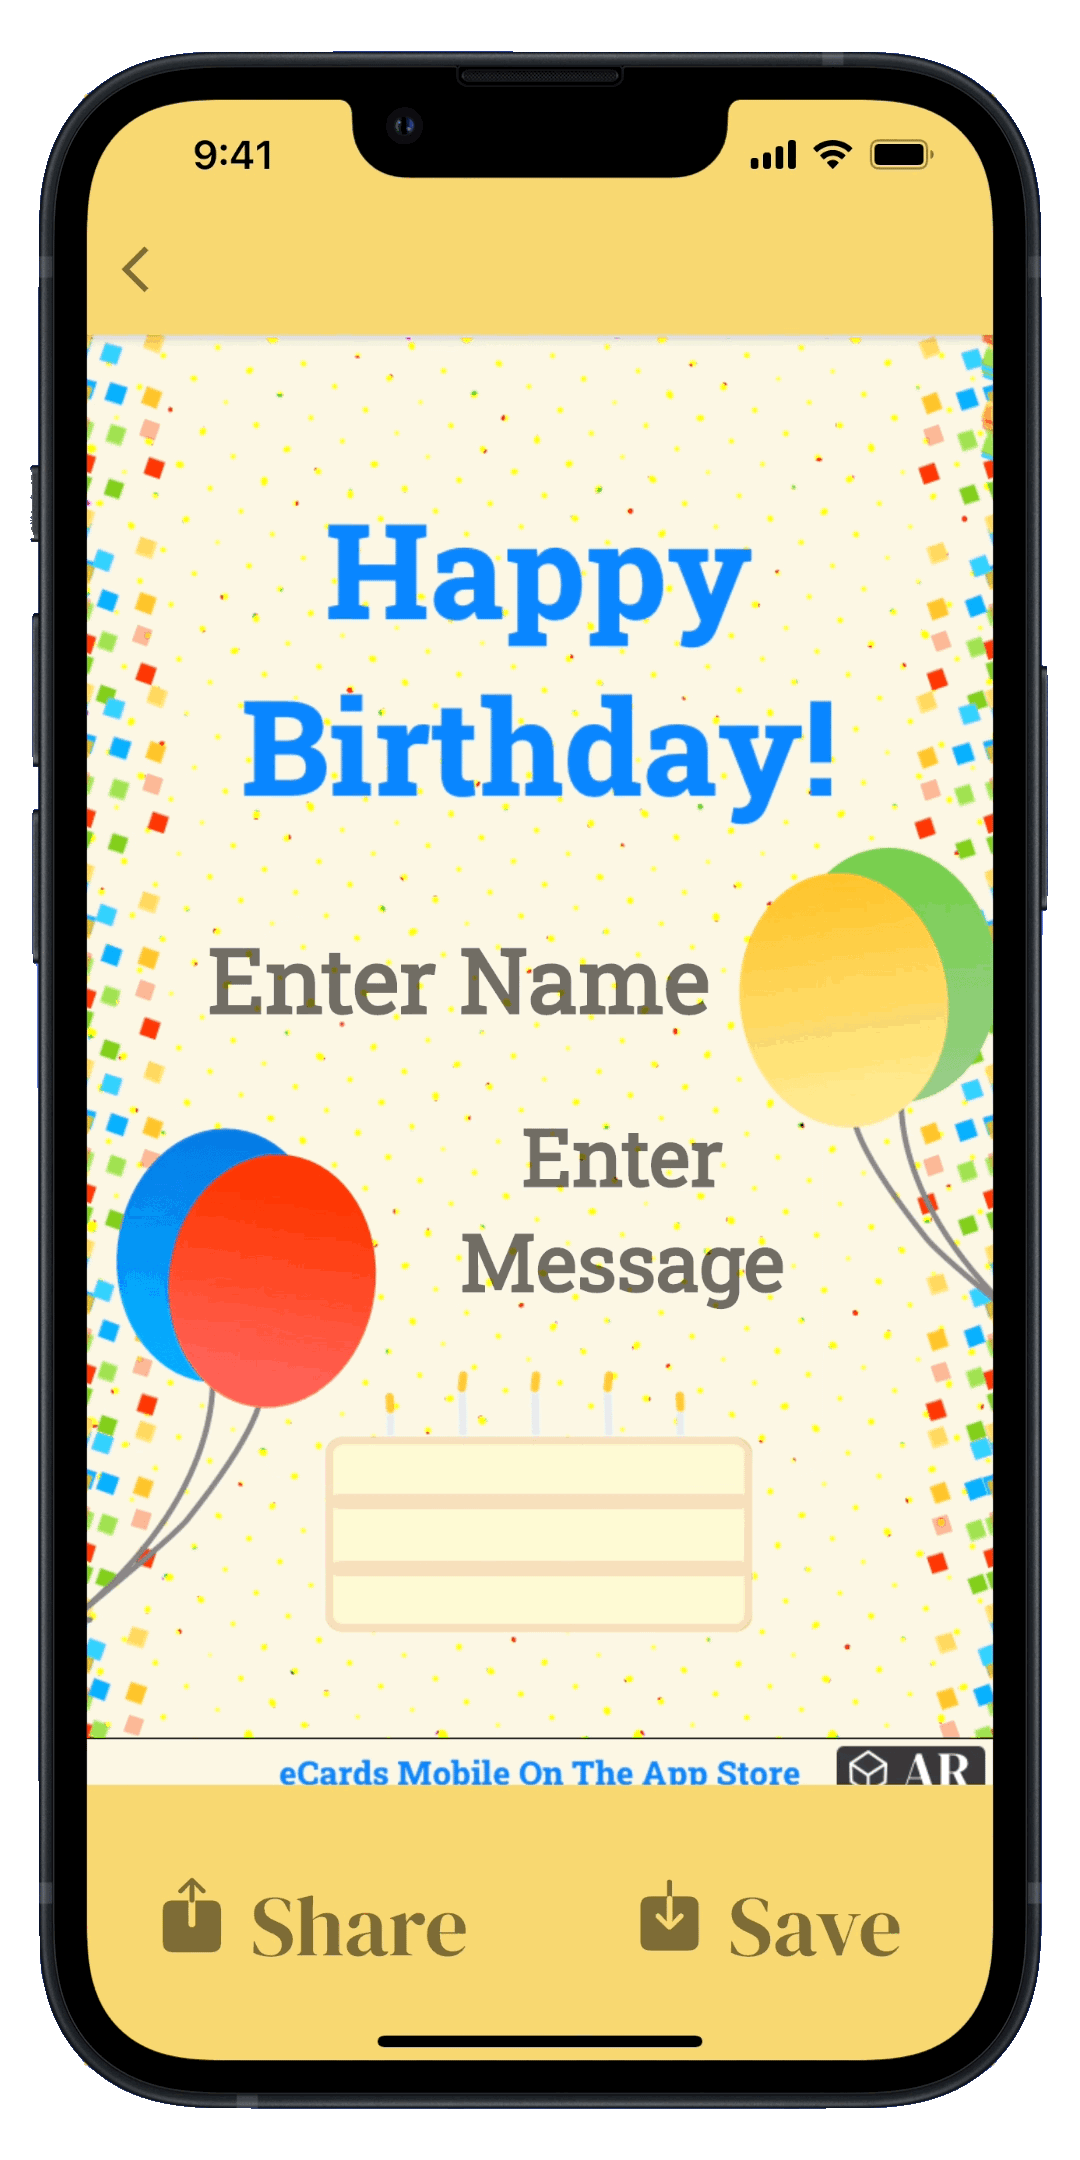 ecards mobile augmented reality birthday greeting card template